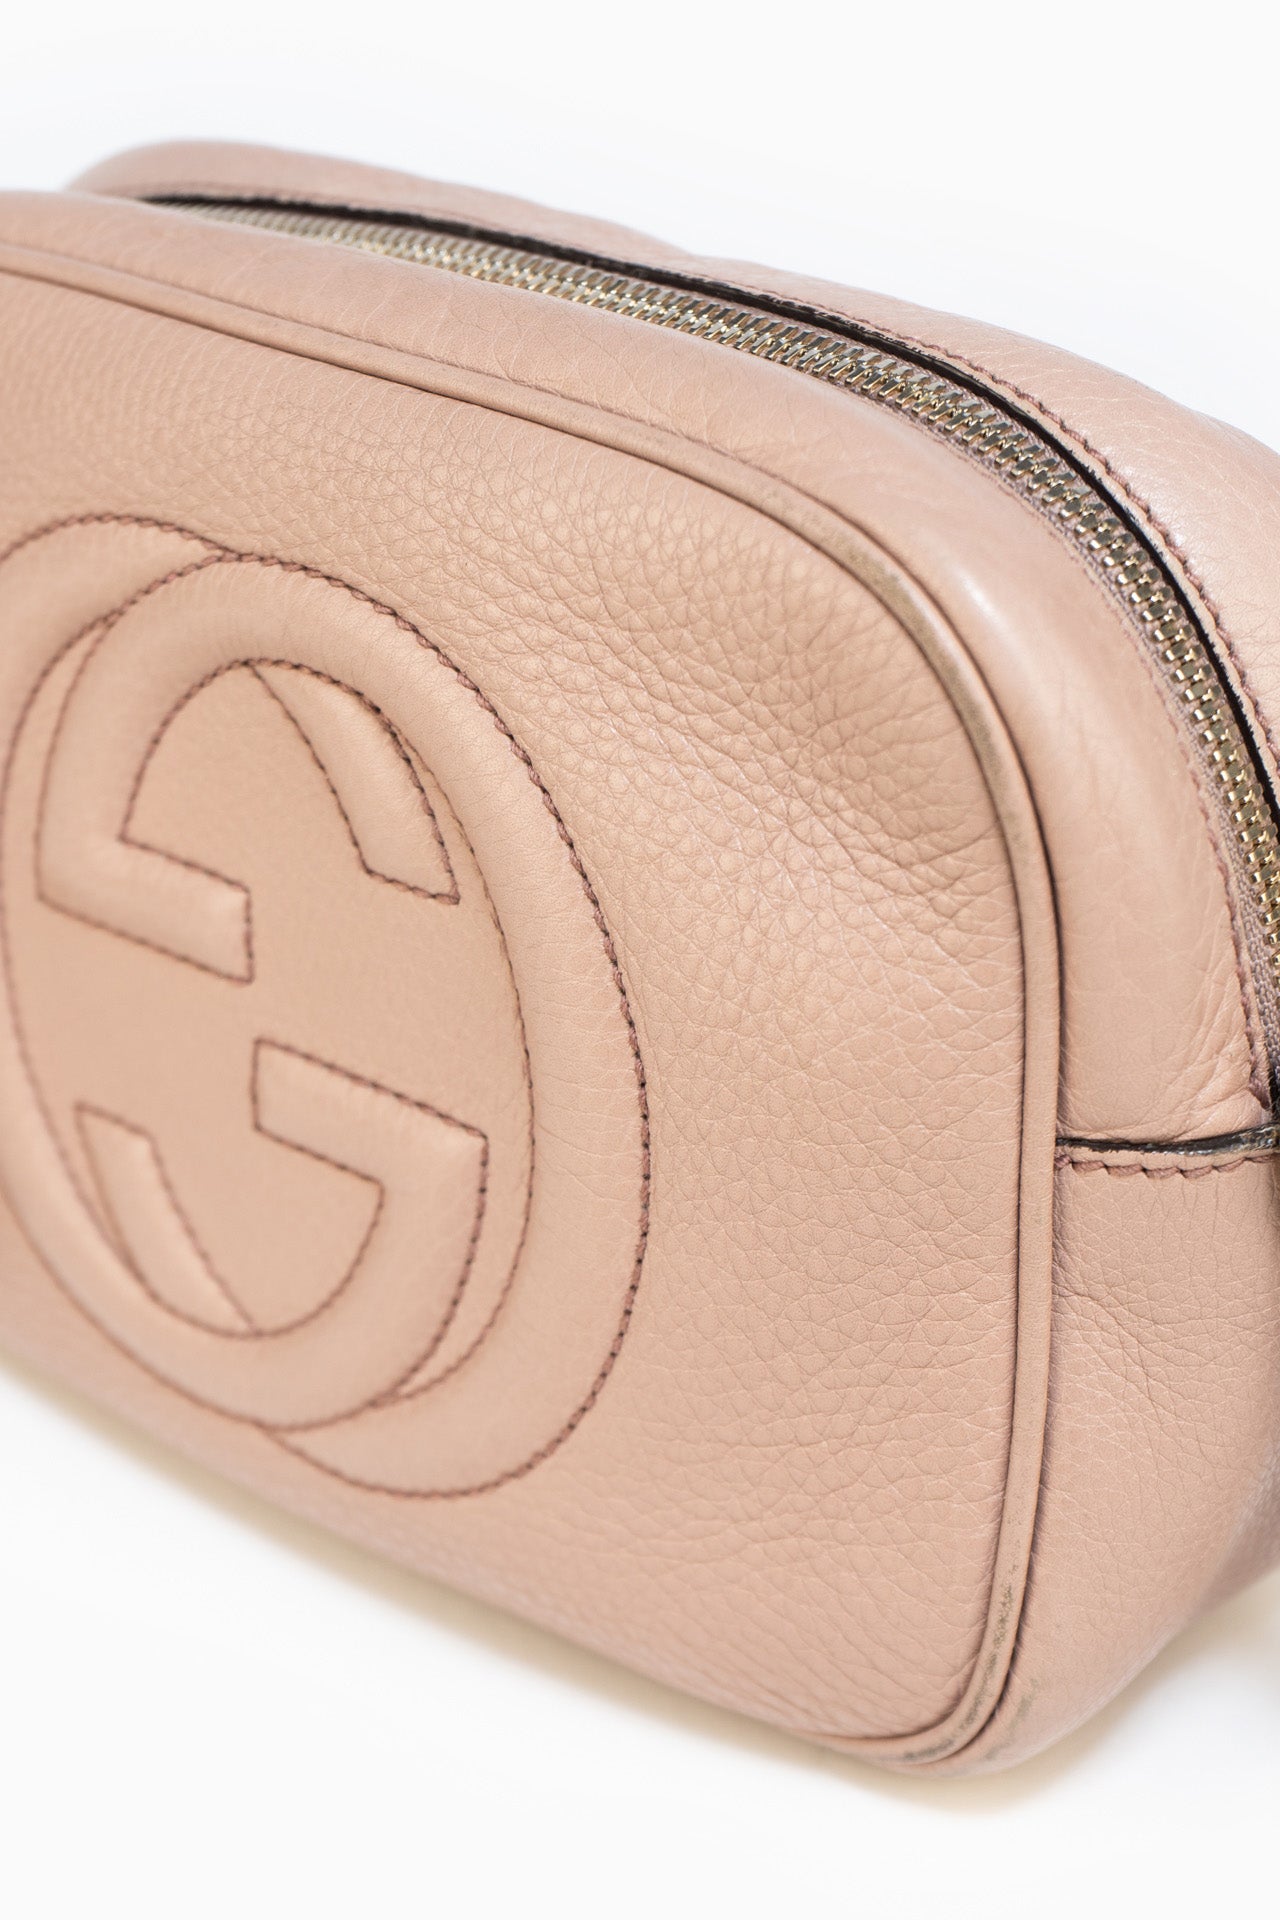 Gucci Soho Small Leather Disco Bag In Beige